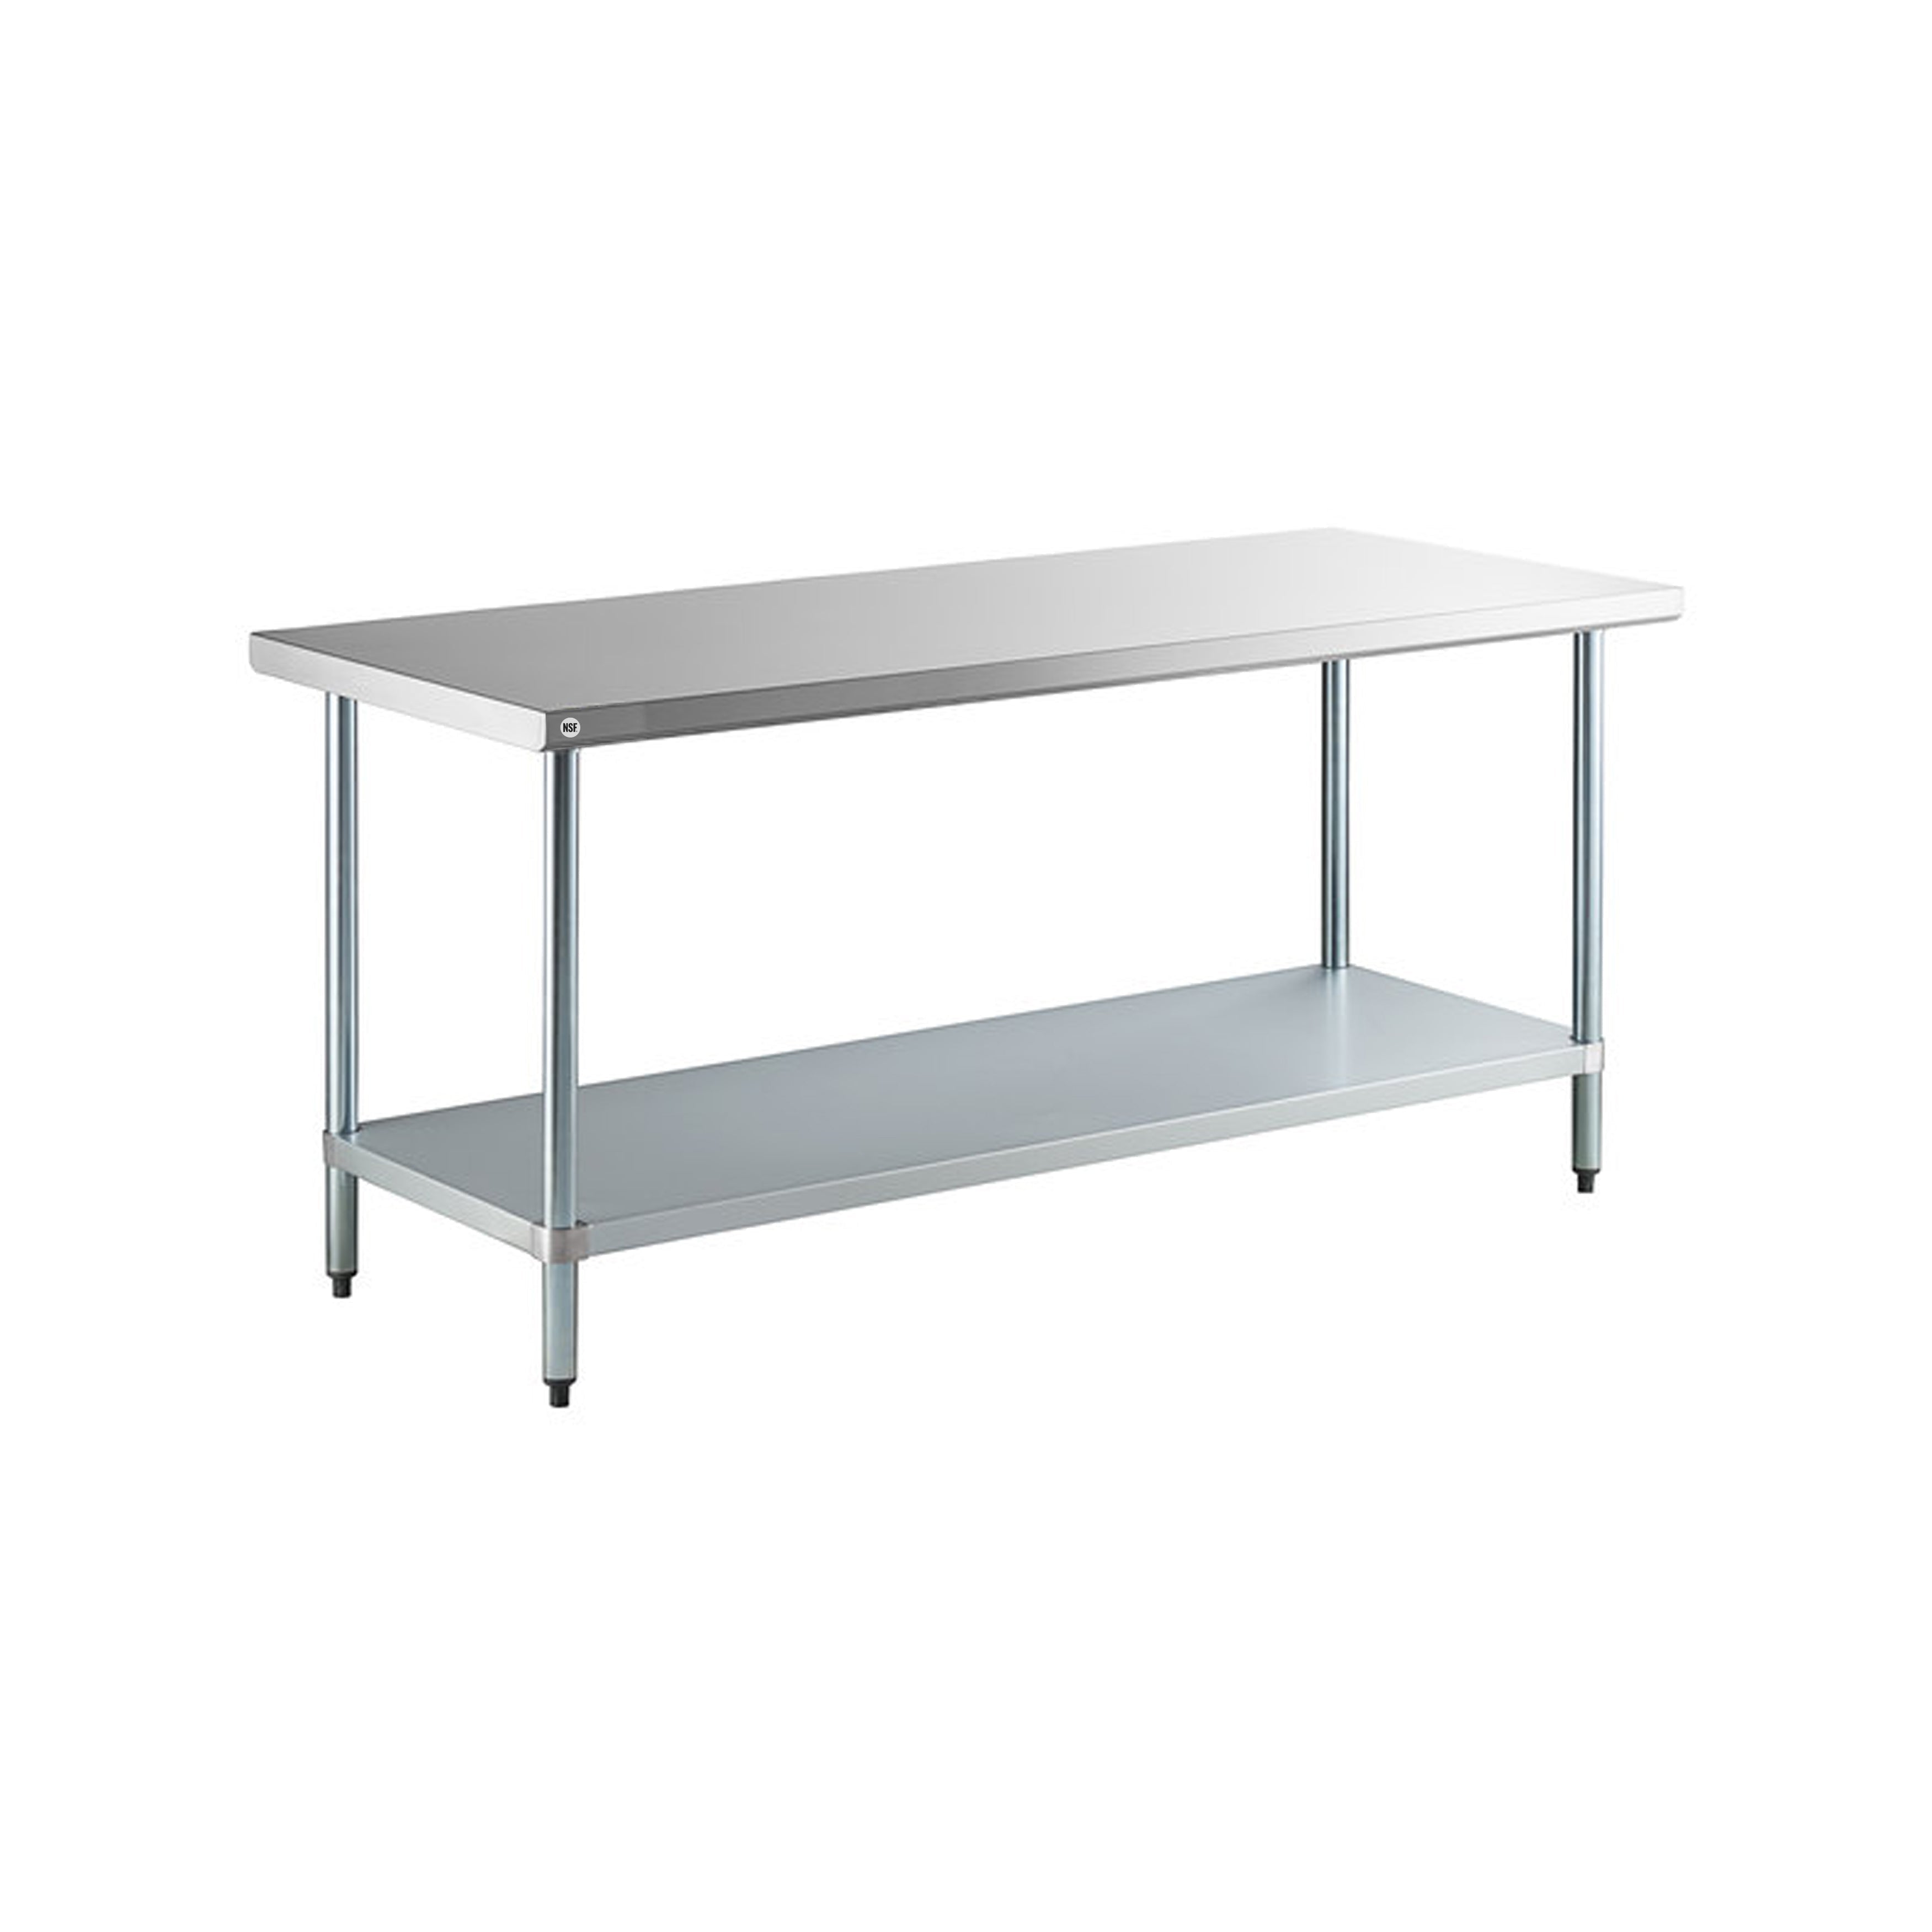 Omcan - 17587, Commercial 60" x 30" Stainless Steel Kitchen Work Table 1200lbs Medium Duty